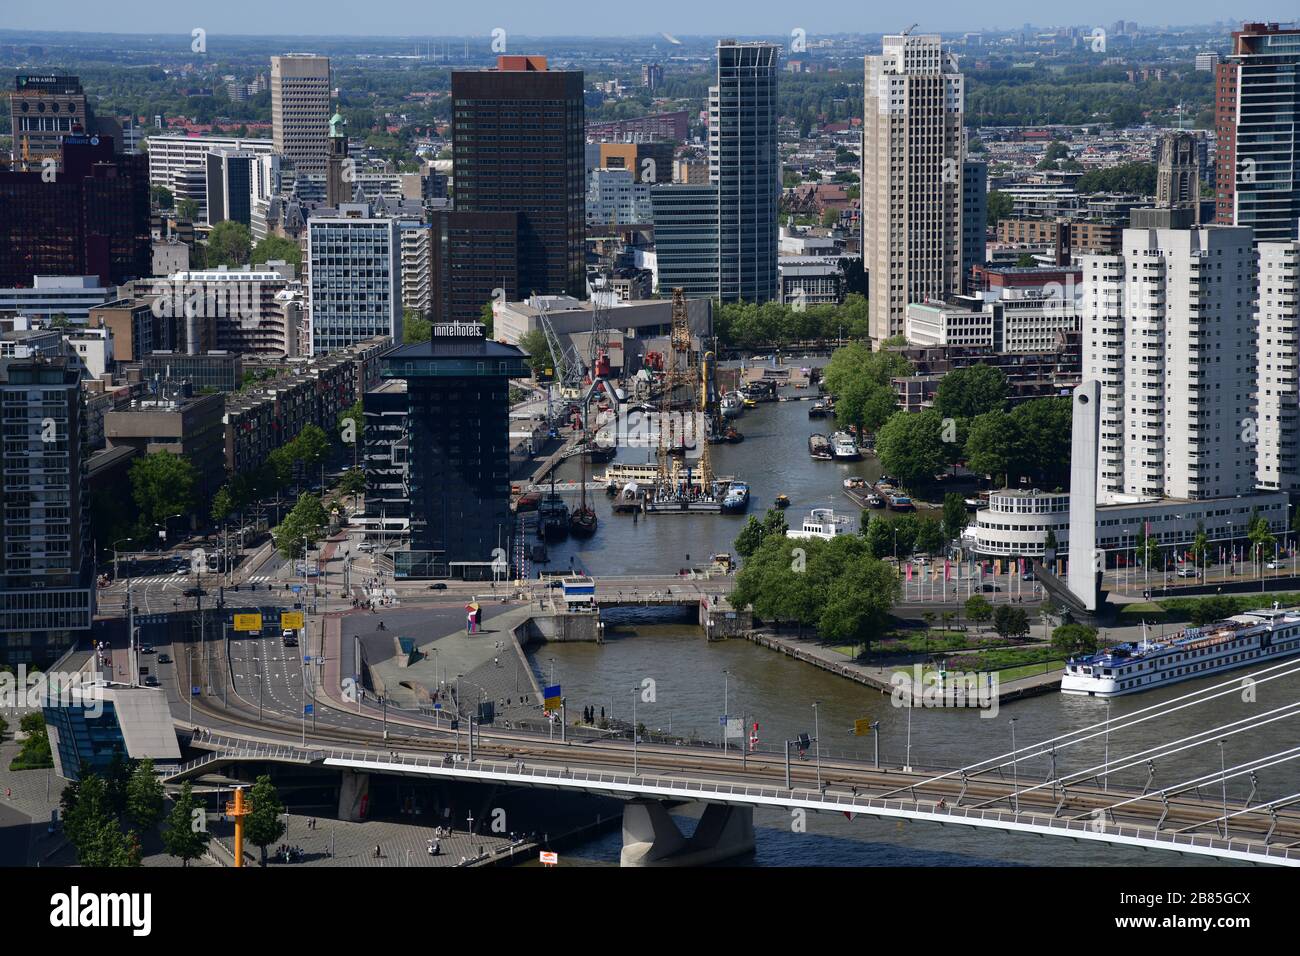 Birdseye view of the skyline of Rotterdam with the Ersamusbridge in the foreground taken from higrise The Rotterdam in the Netherlands Stock Photo